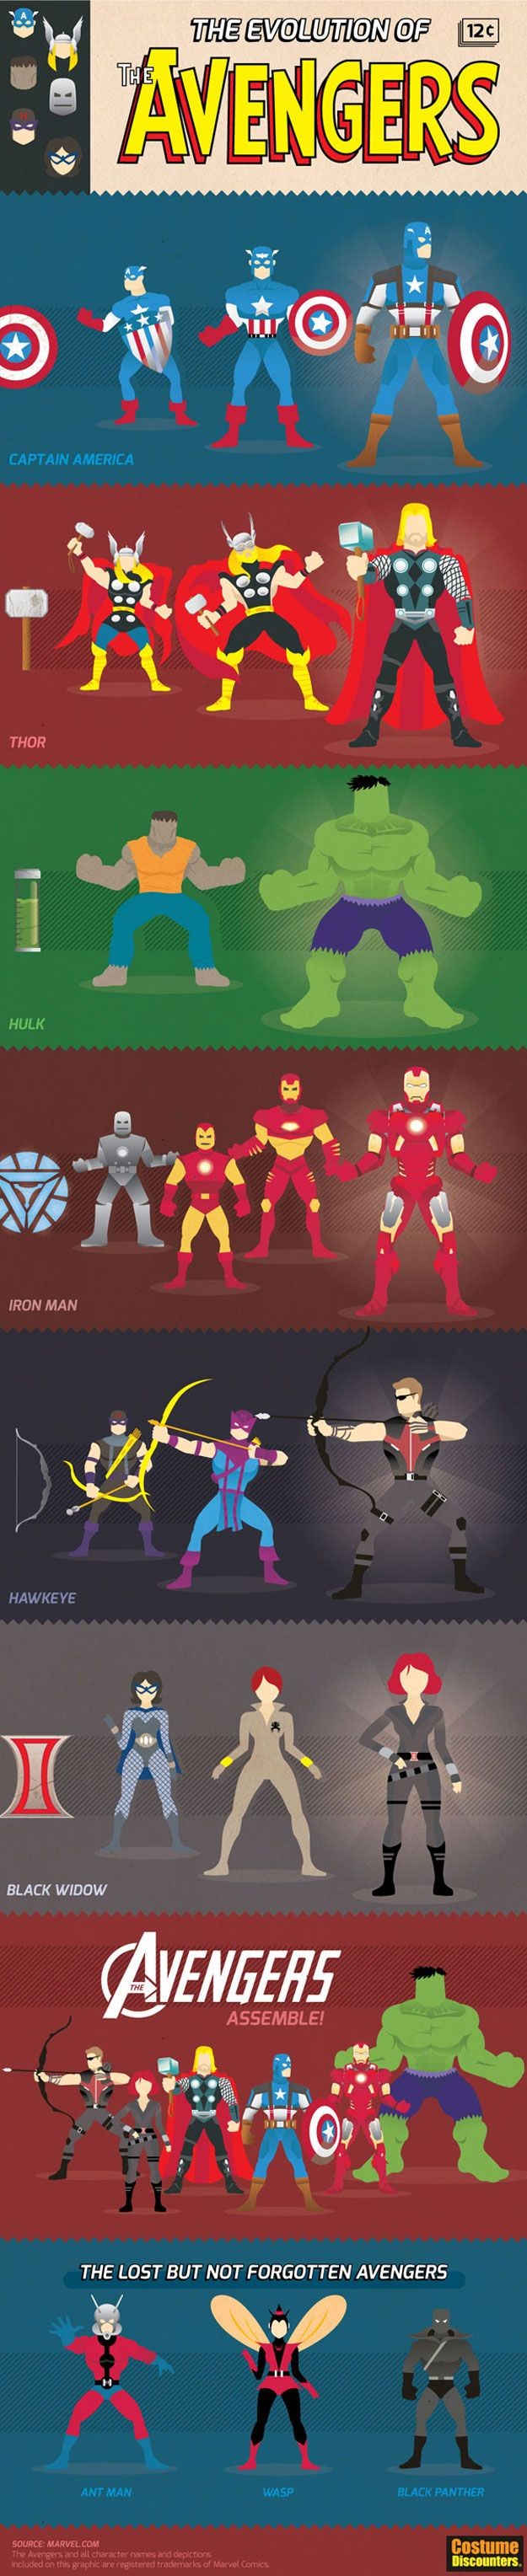 The Evolution Of The Avengers [Infographic]    I r...